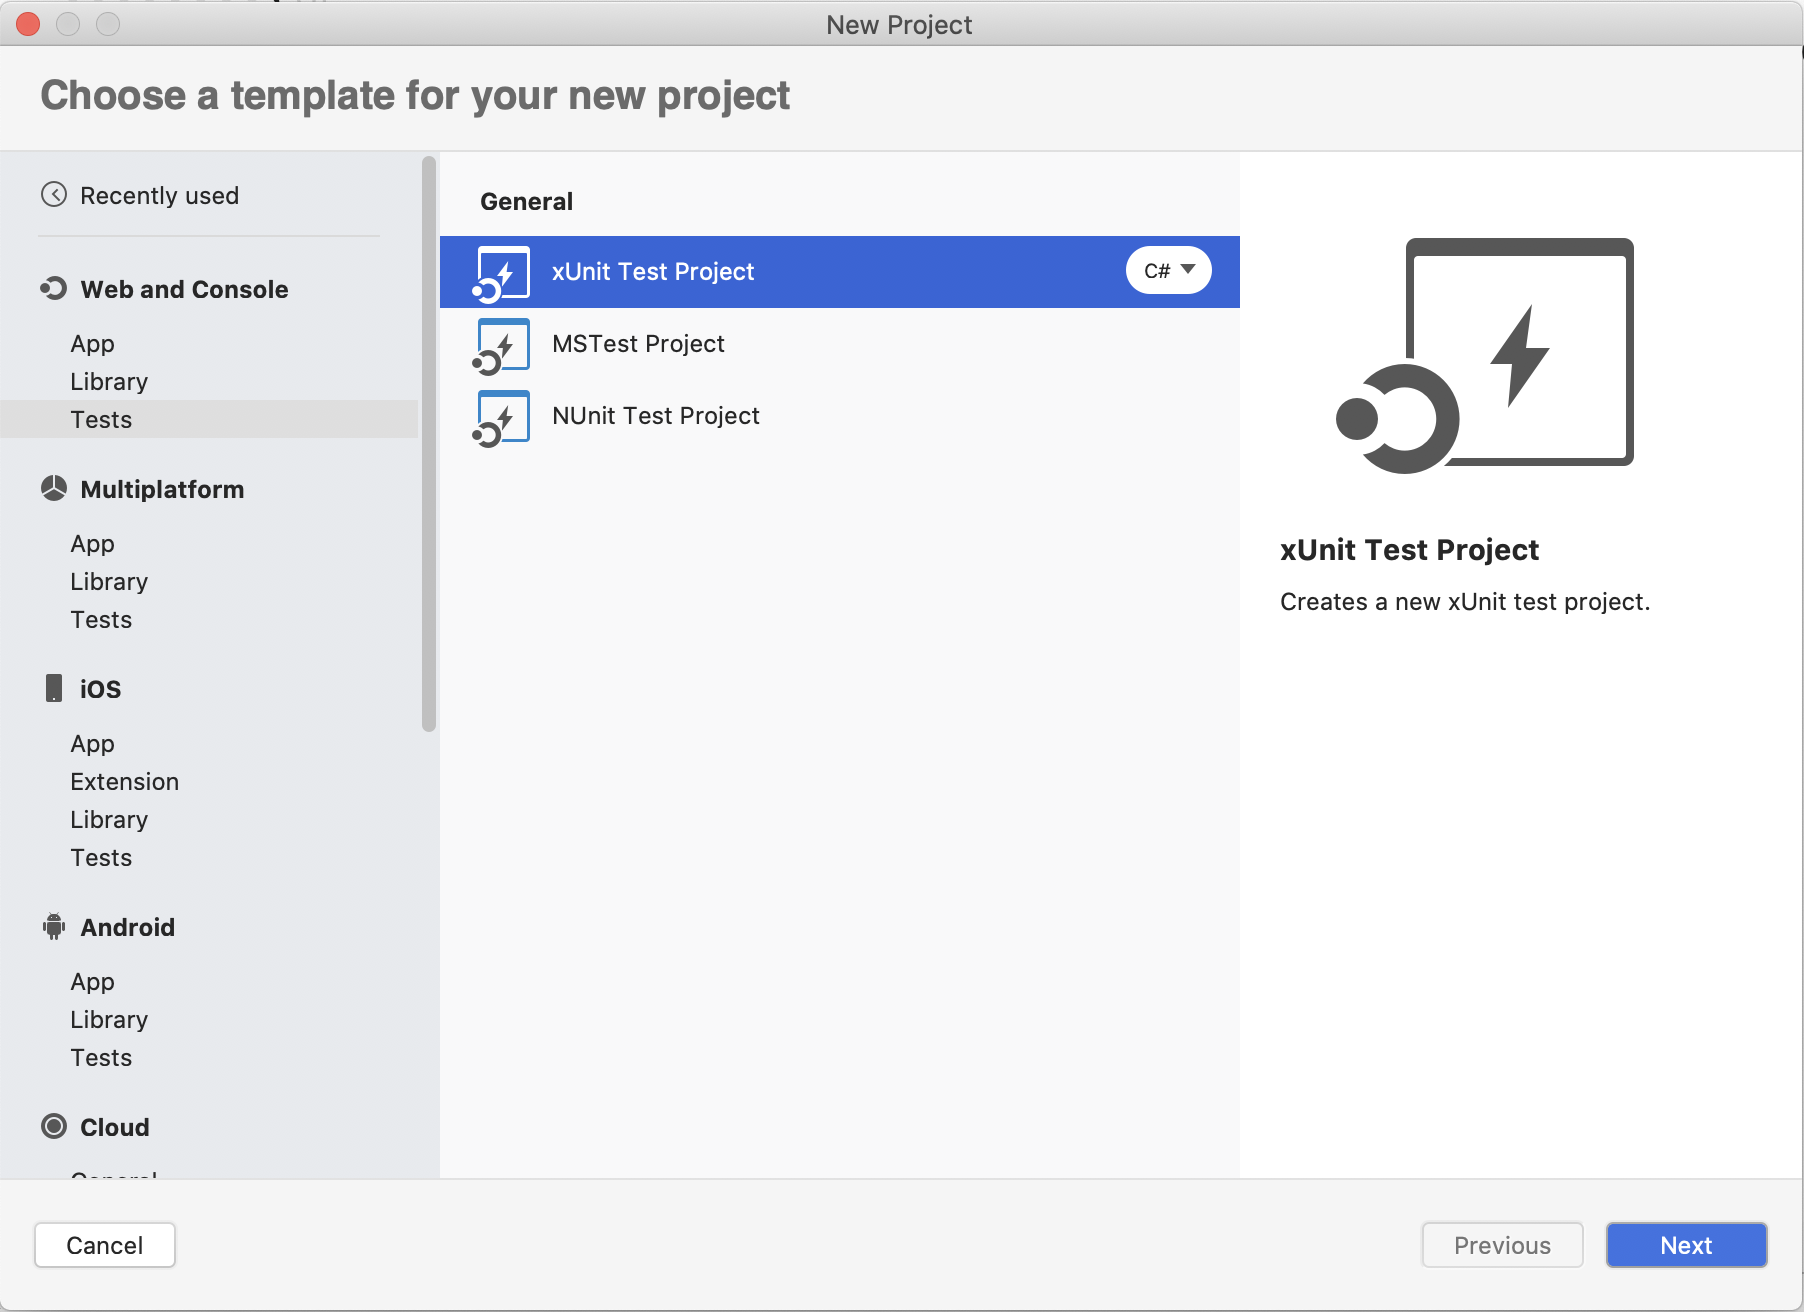 New project dialog with Web and Console > Tests section selected, showing xUnit, MSTest, and NUnit projects